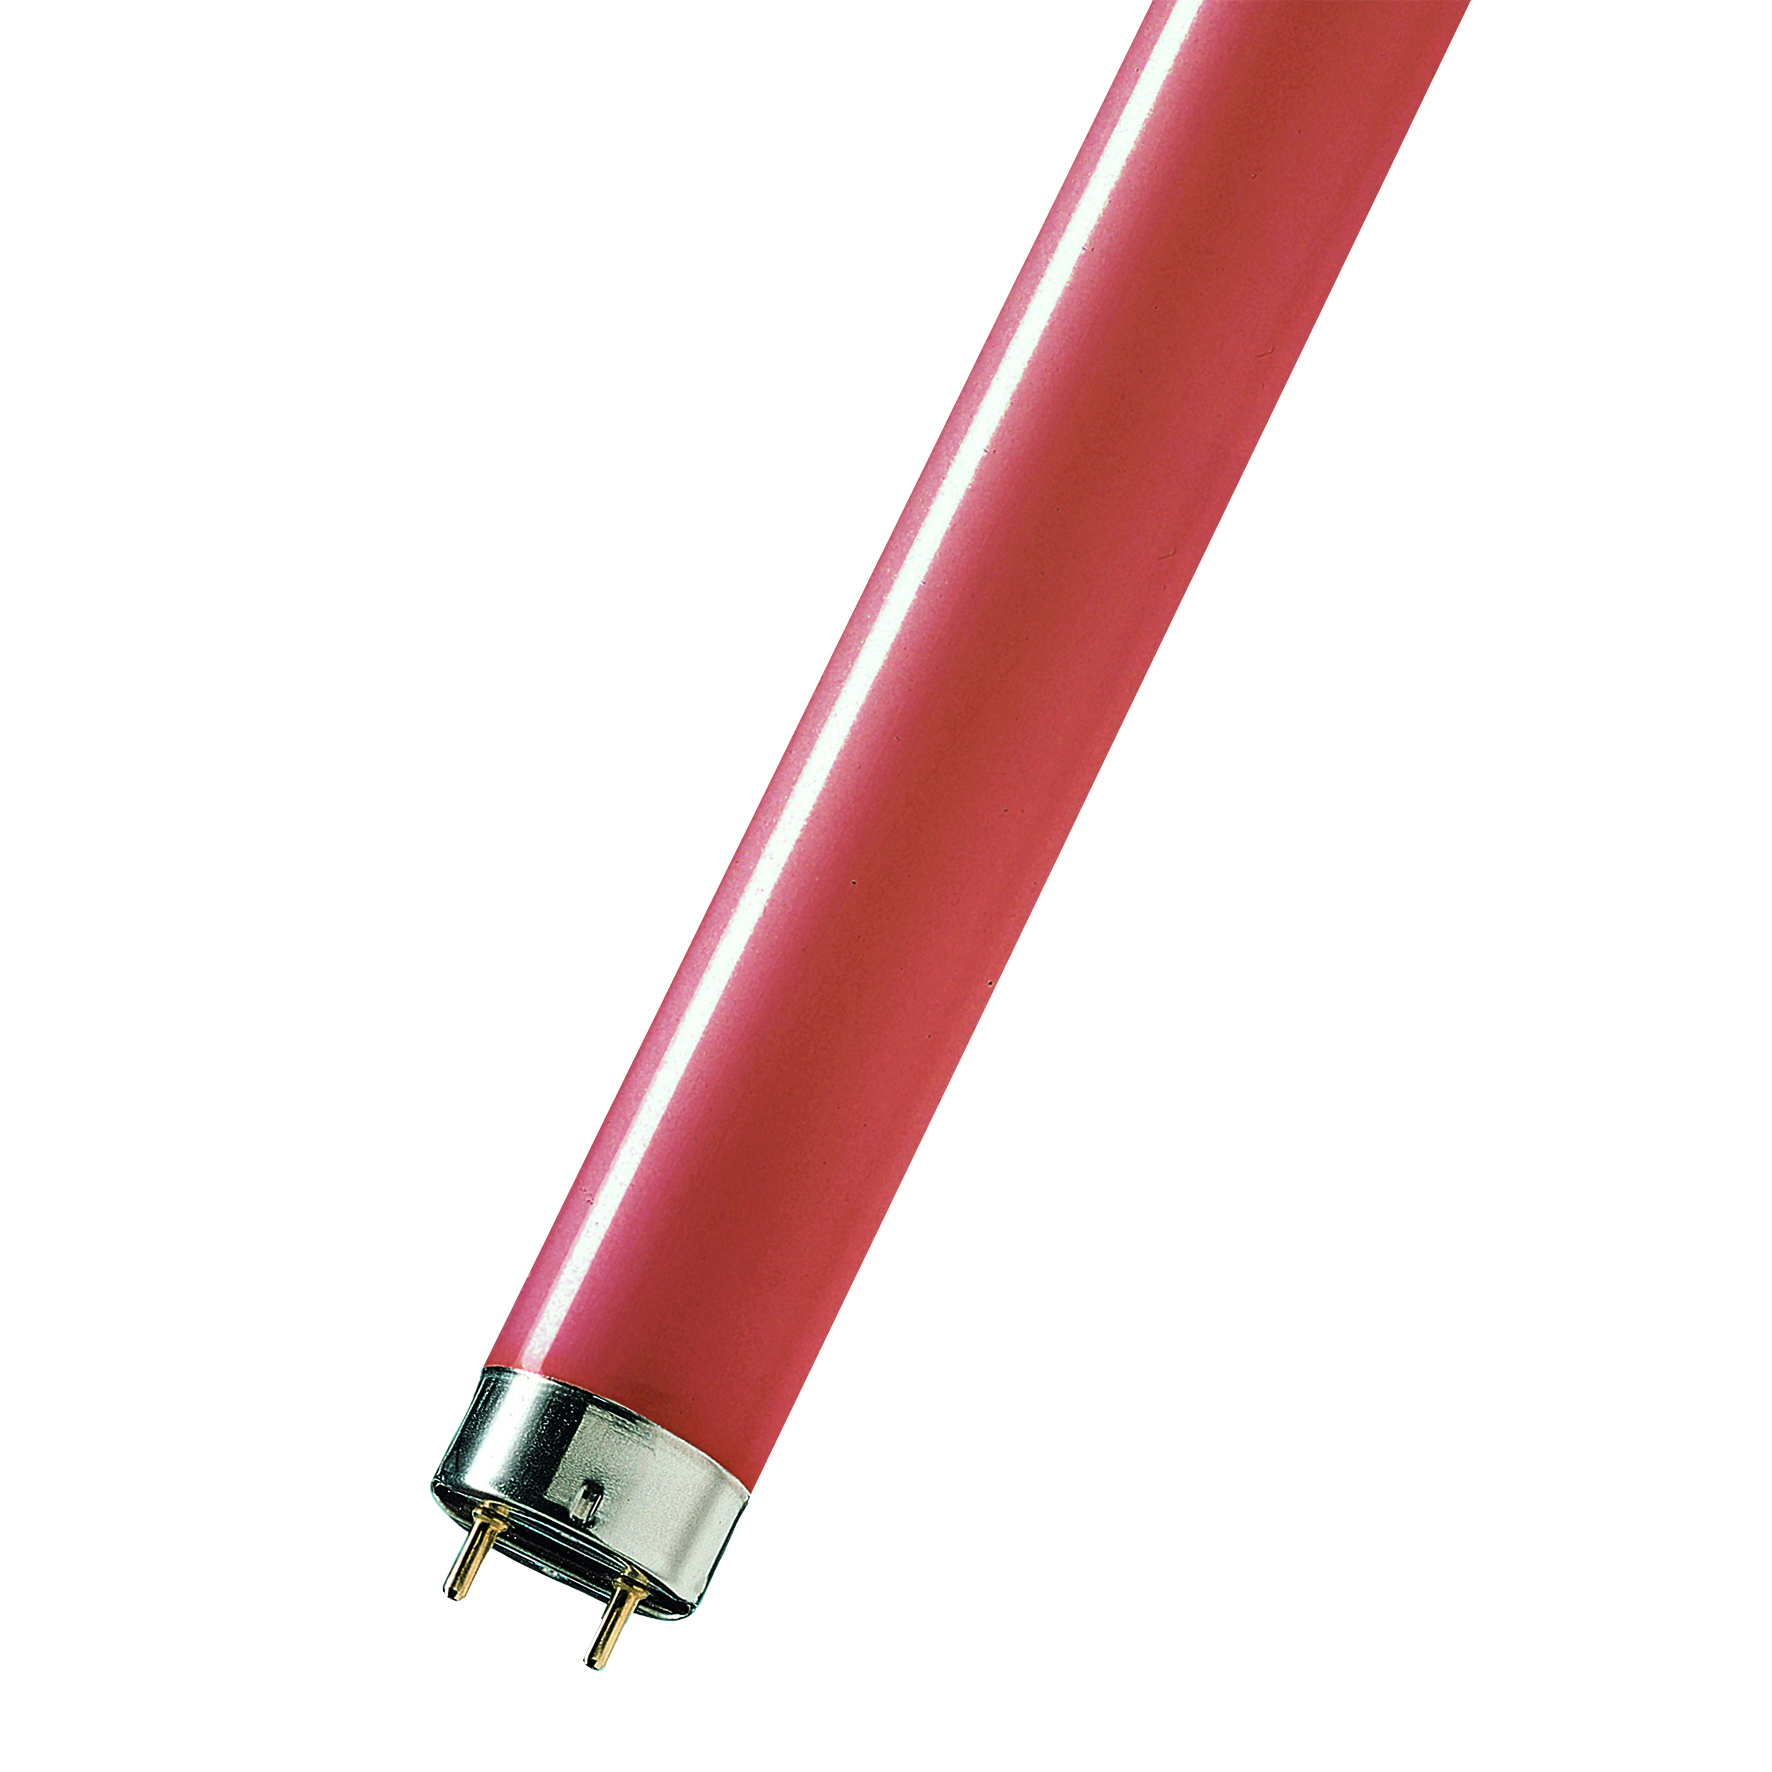 Tube Philips TL-D 58W red long 1,50m rouge